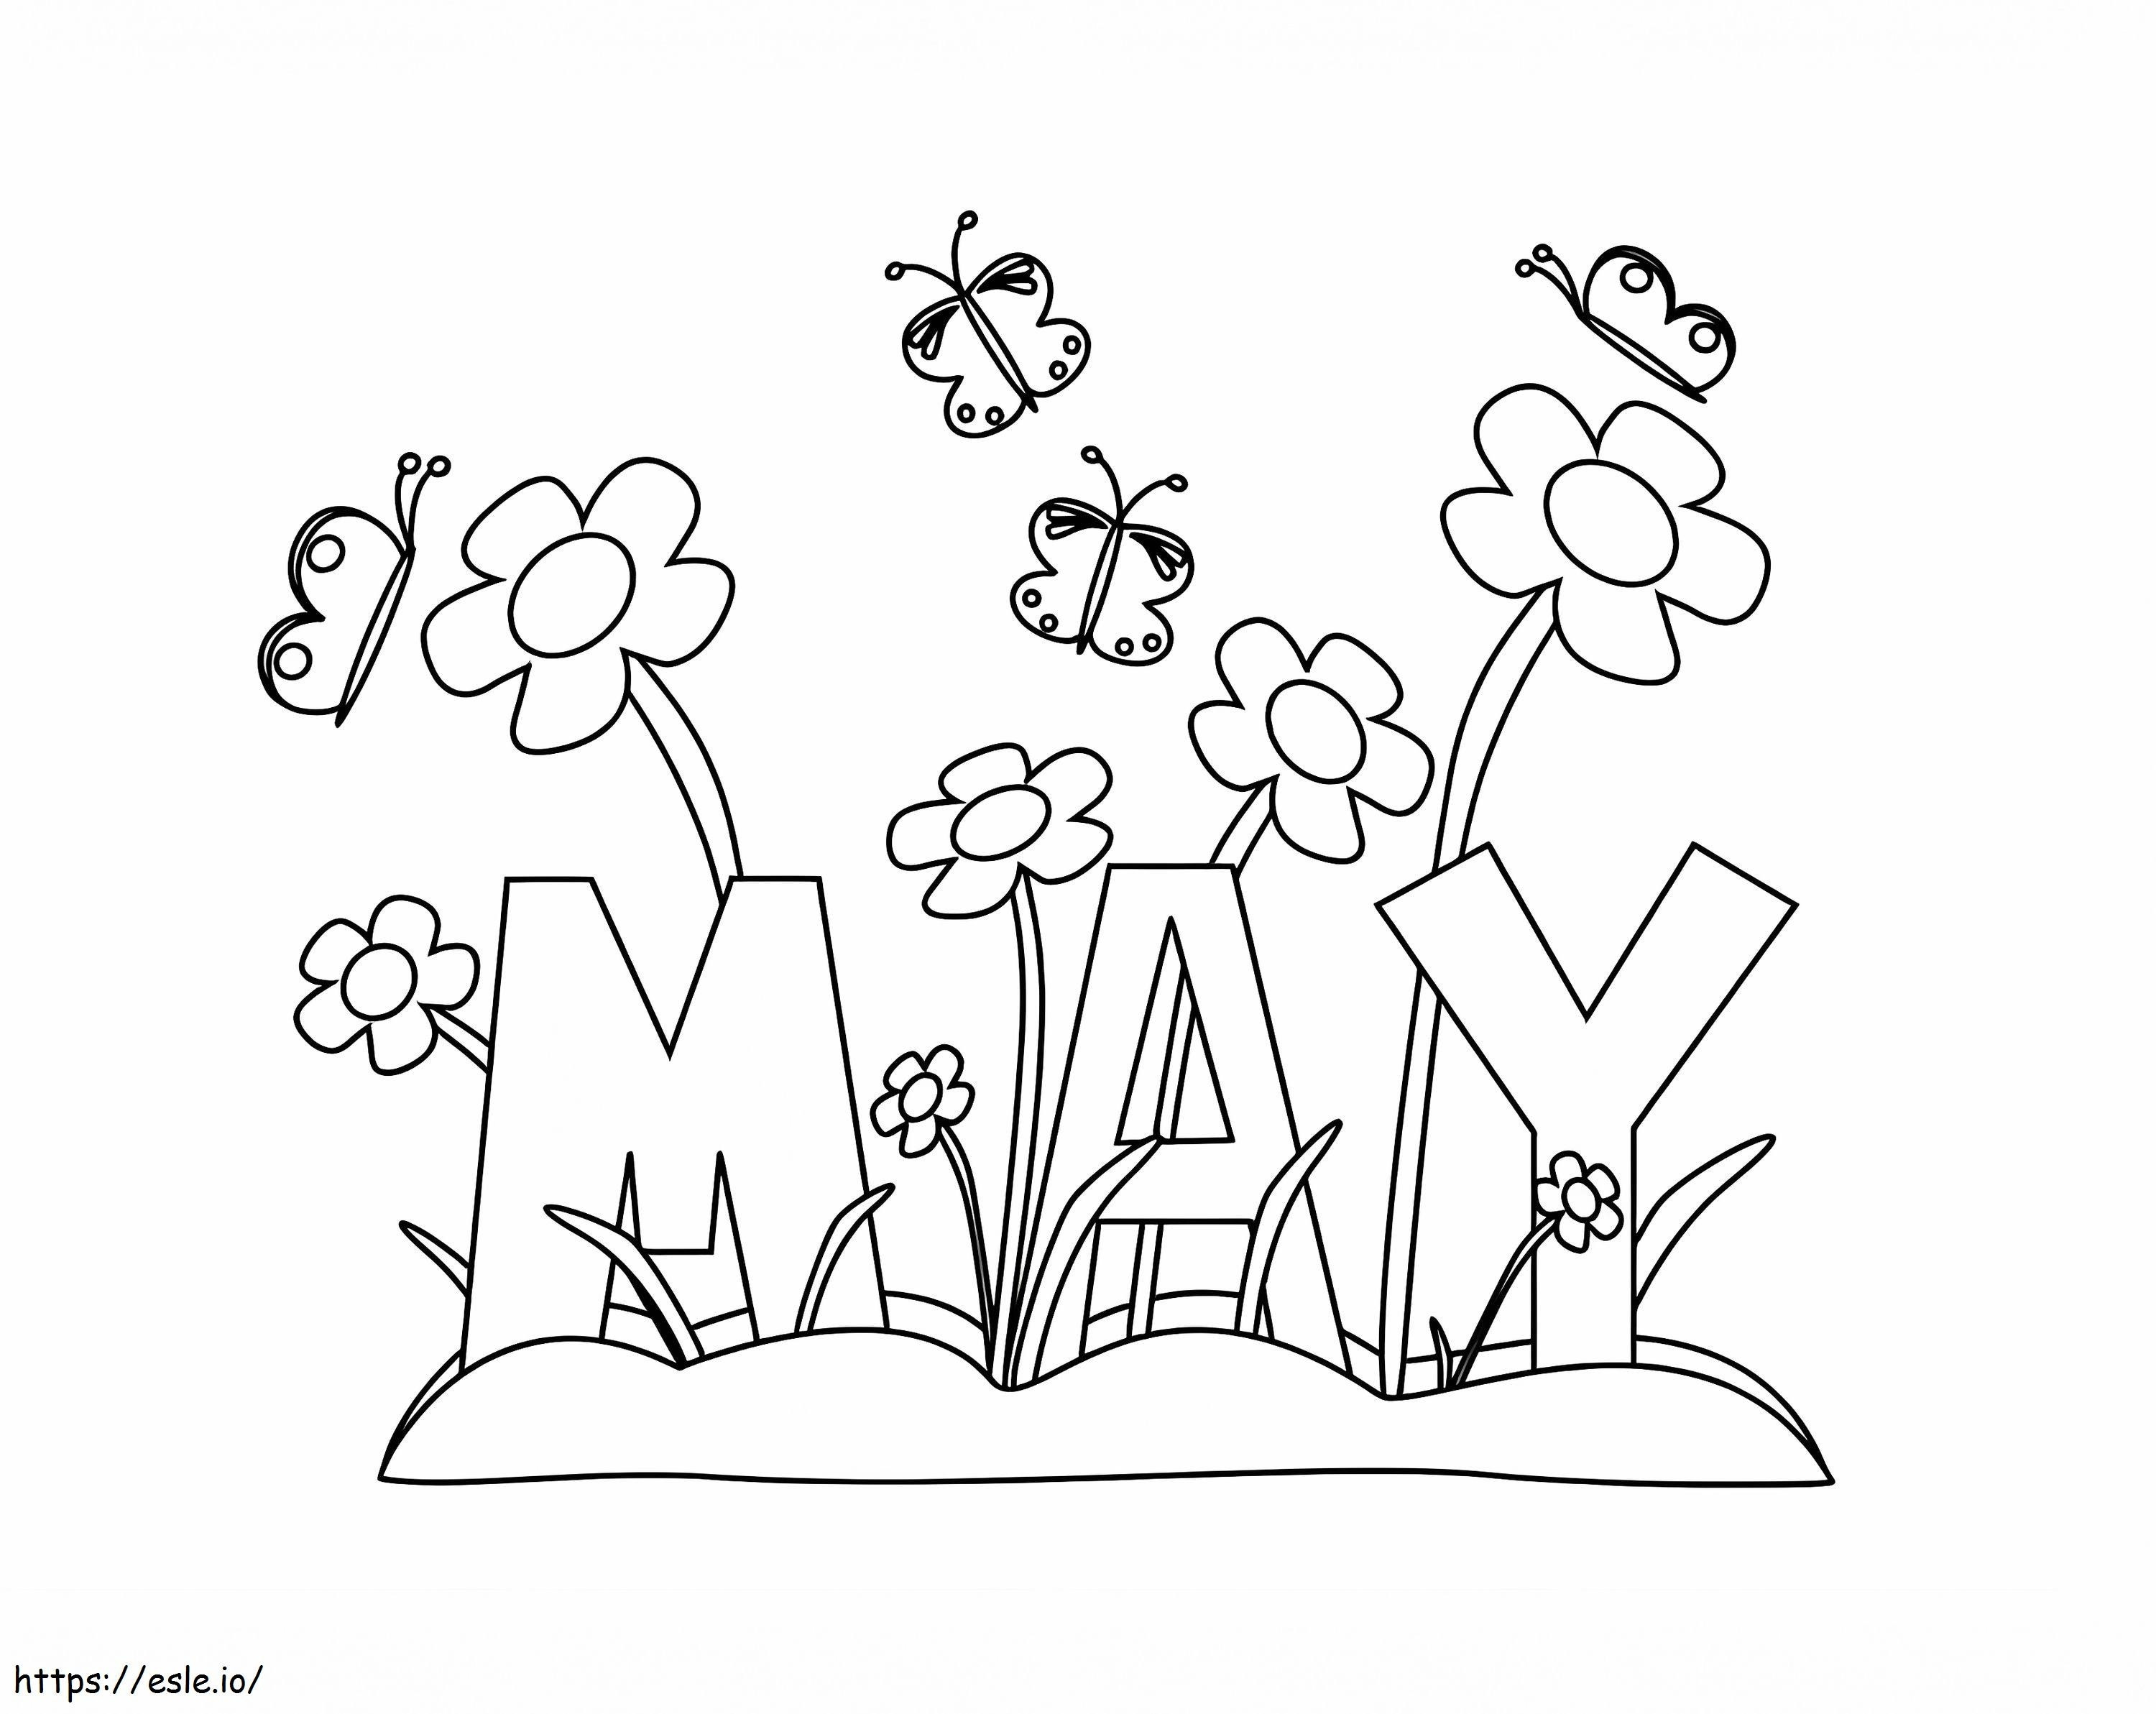 May 6Th coloring page